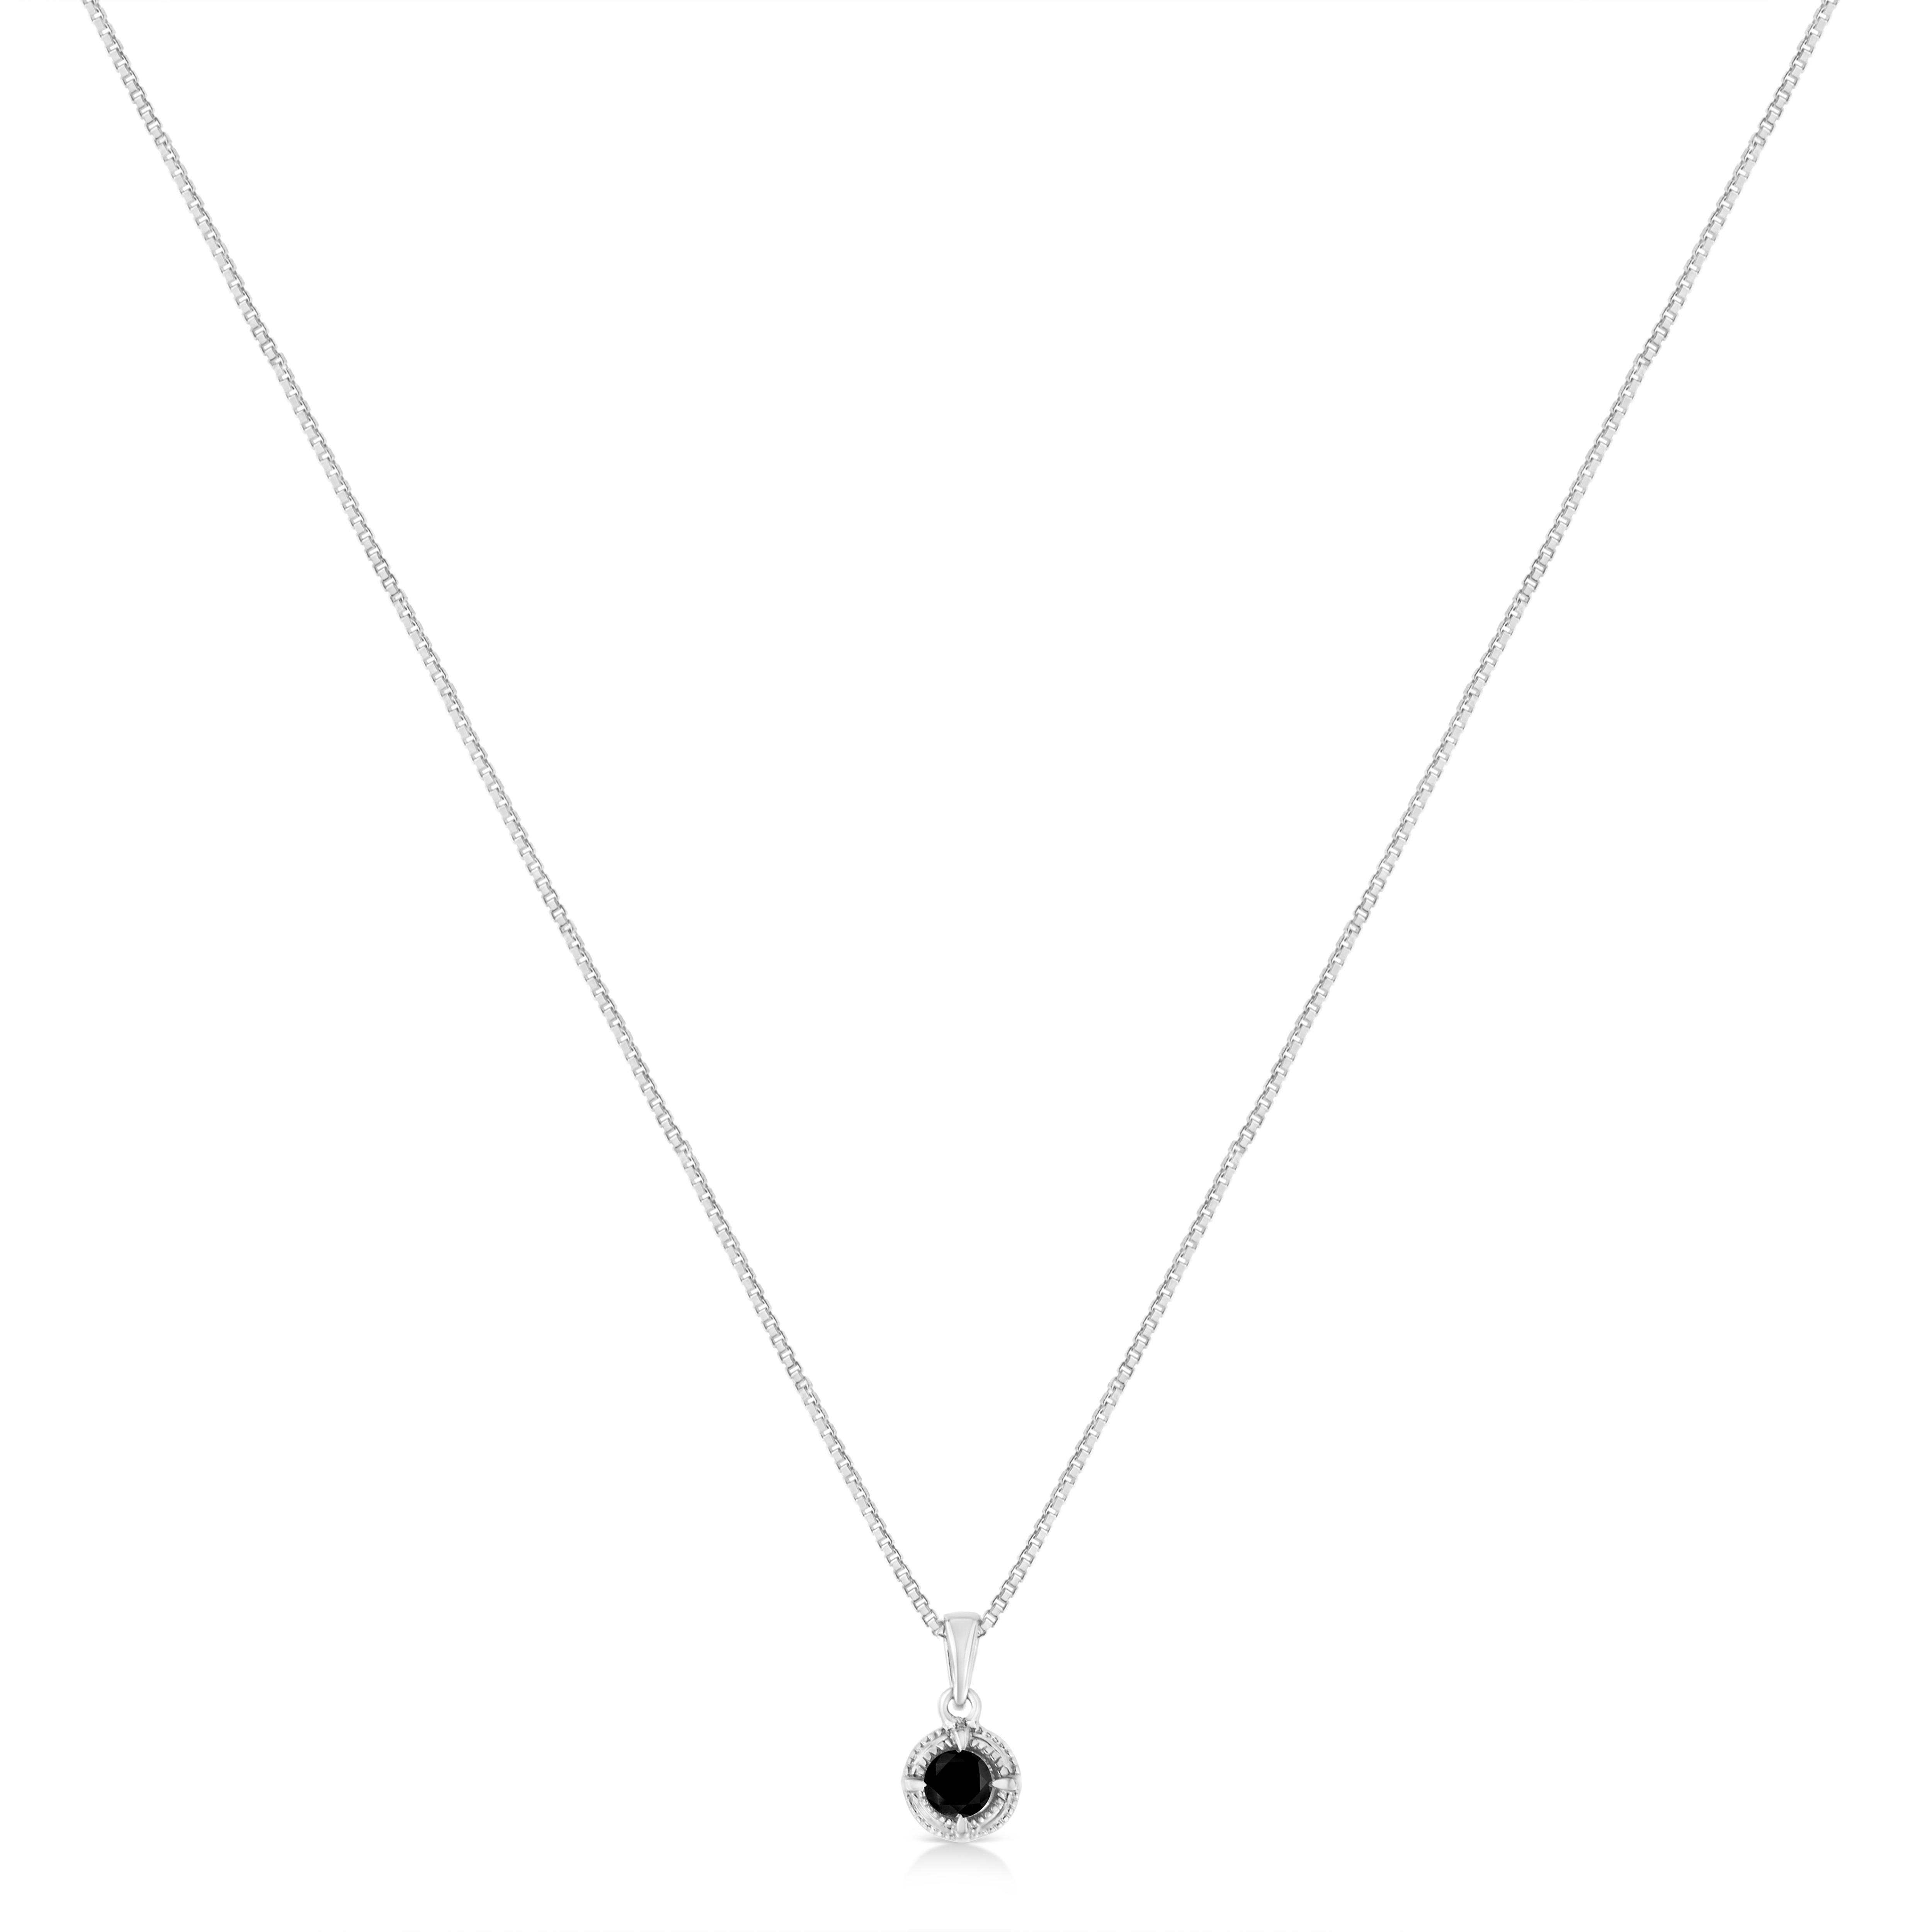 Some things should be reinvented, which is why we created this twist on the solitaire diamond necklace. This unique solitaire diamond necklace features a single treated black diamond which is 4 Prong set in a .925 Sterling Silver setting. This round